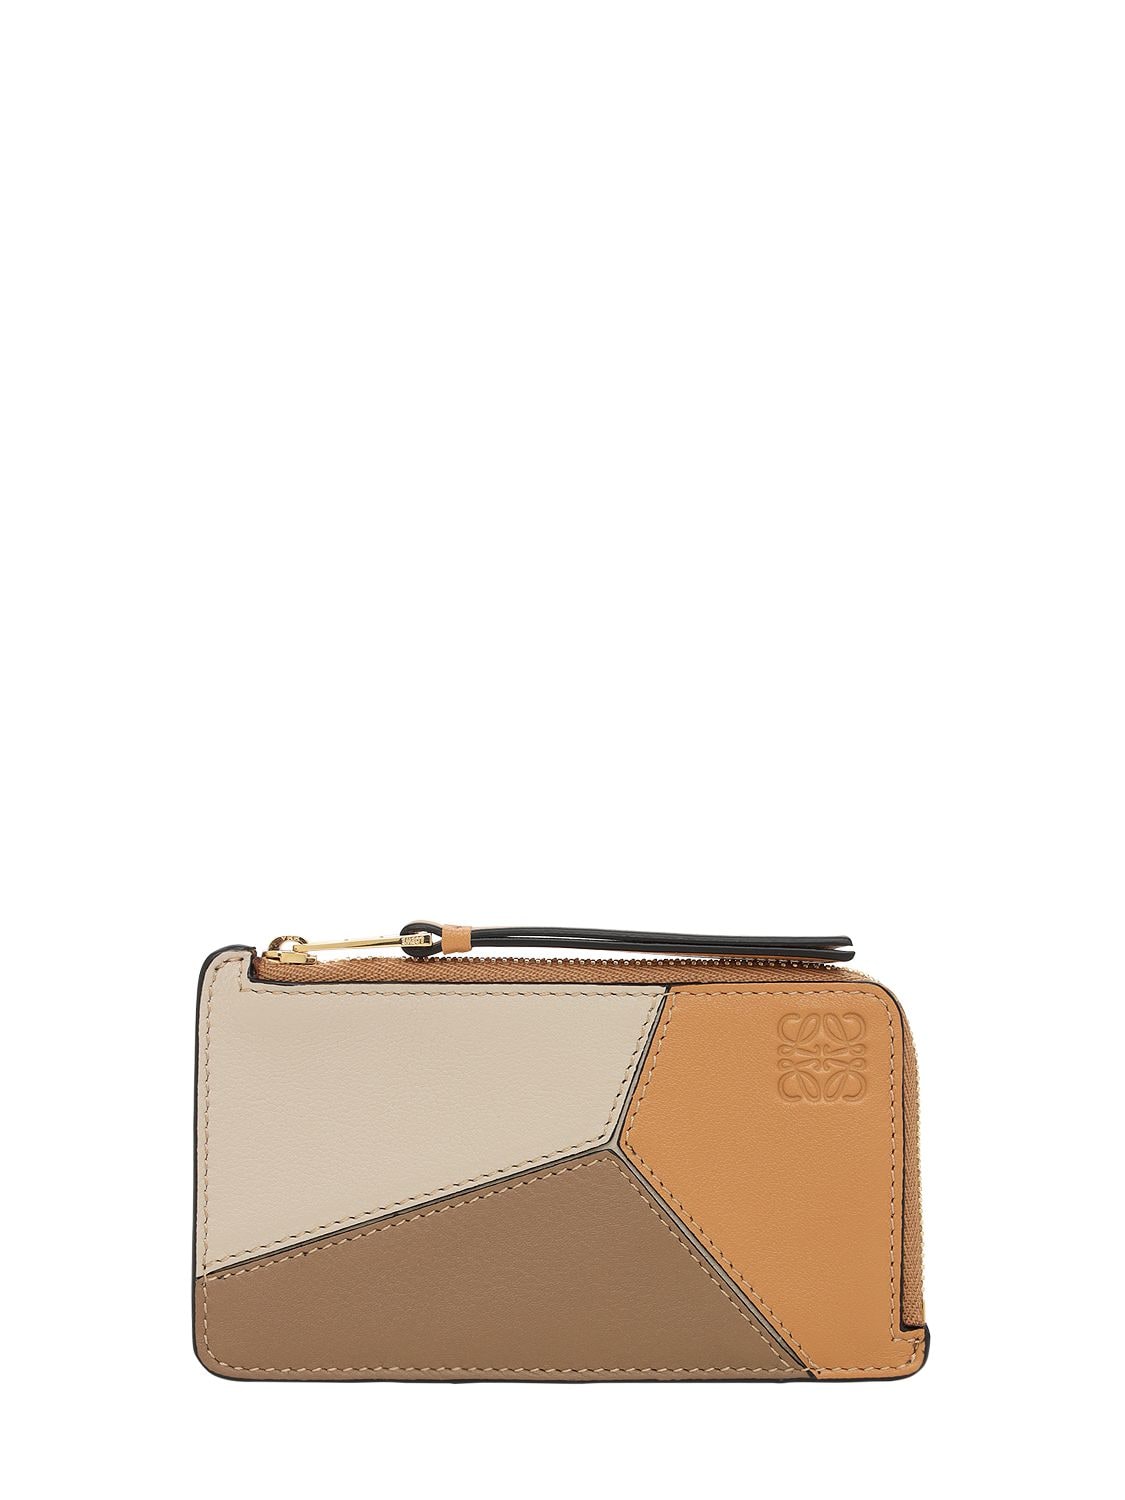 LOEWE PUZZLE COIN LEATHER CARD HOLDER,73I3E8001-MZK0MW2